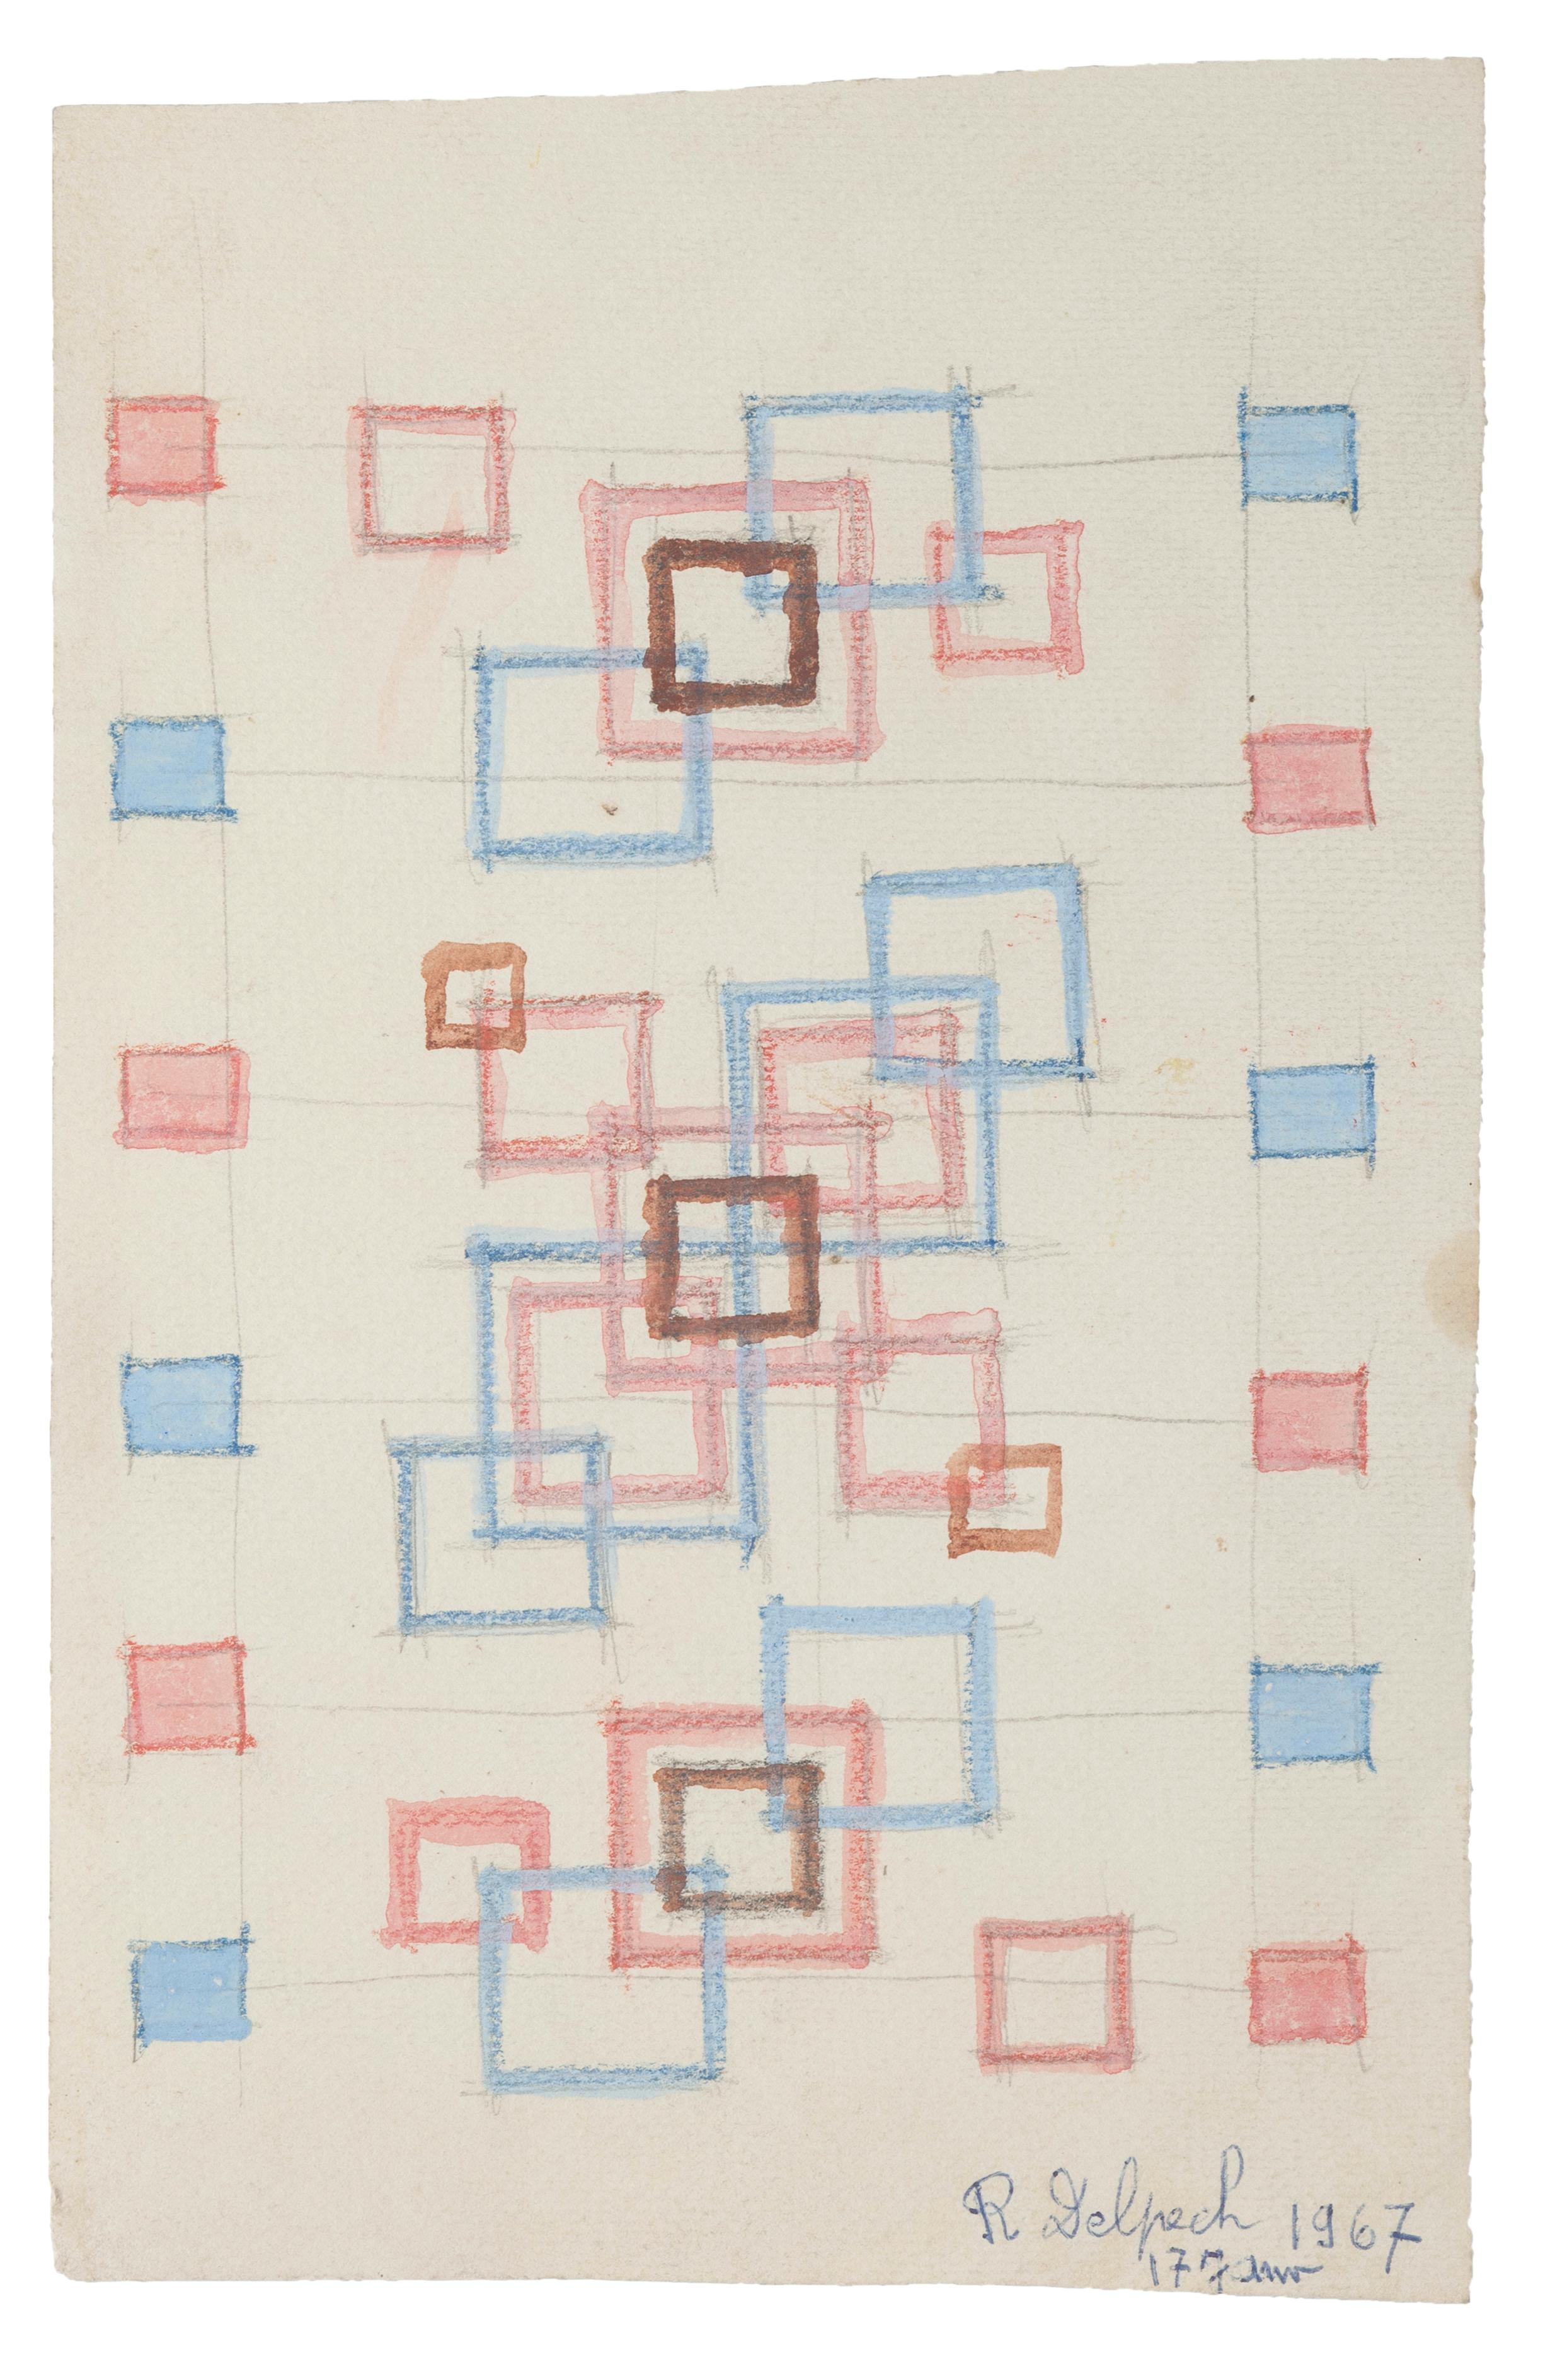  Geometric Composition - Watercolor on Paper by J.-R. Delpech - 1967